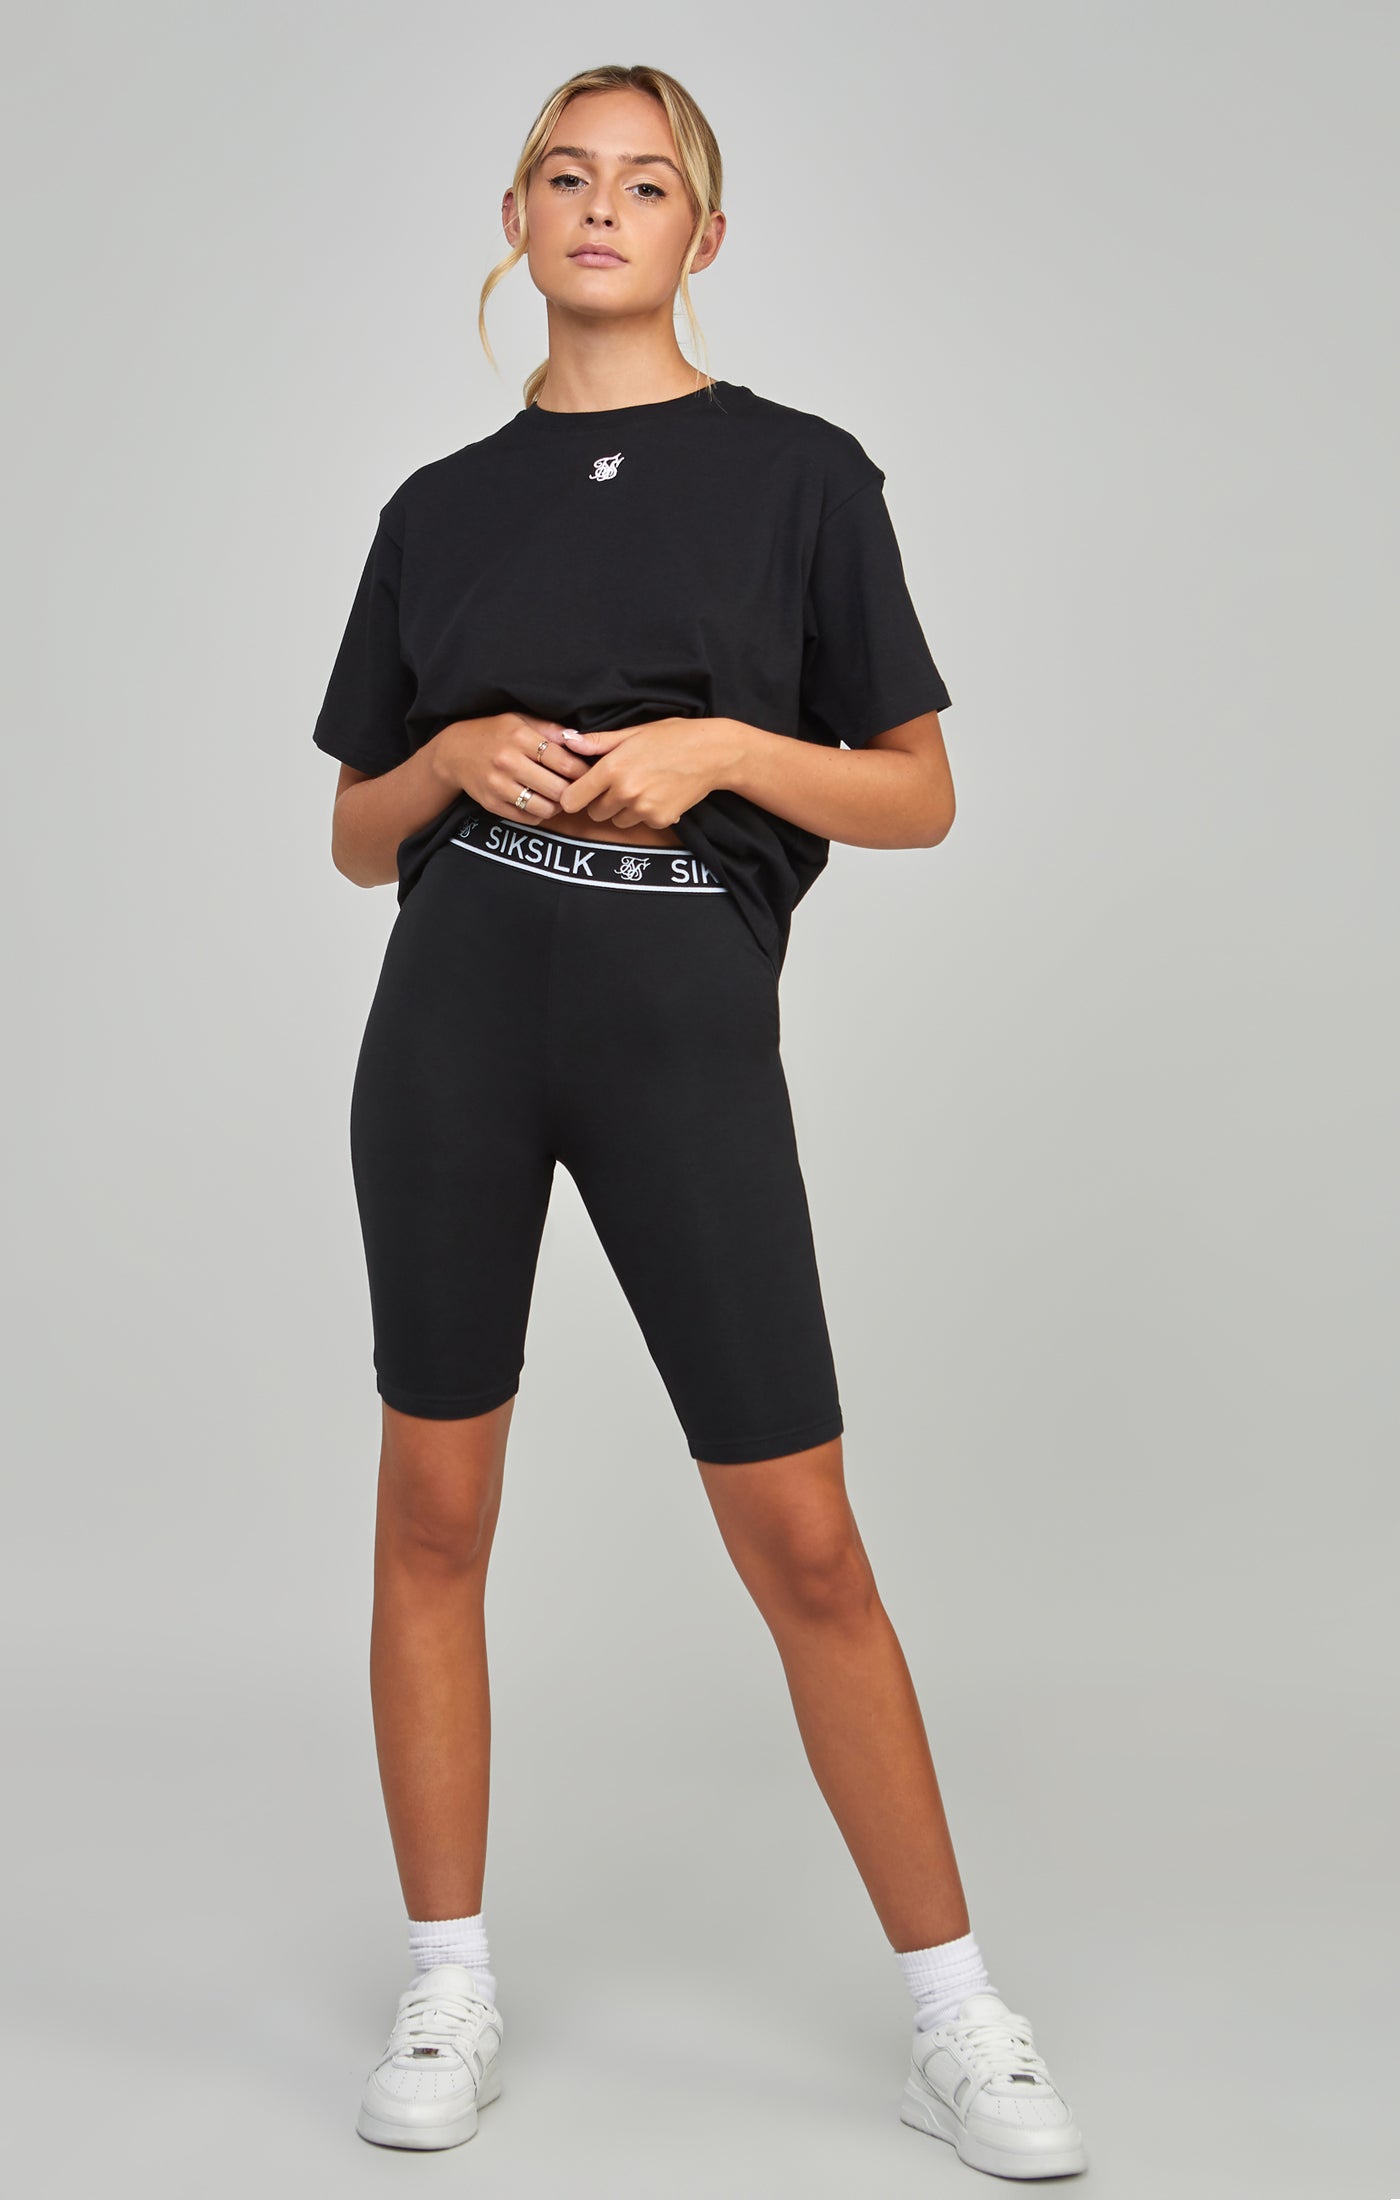 Black Tape Cycle Short (1)